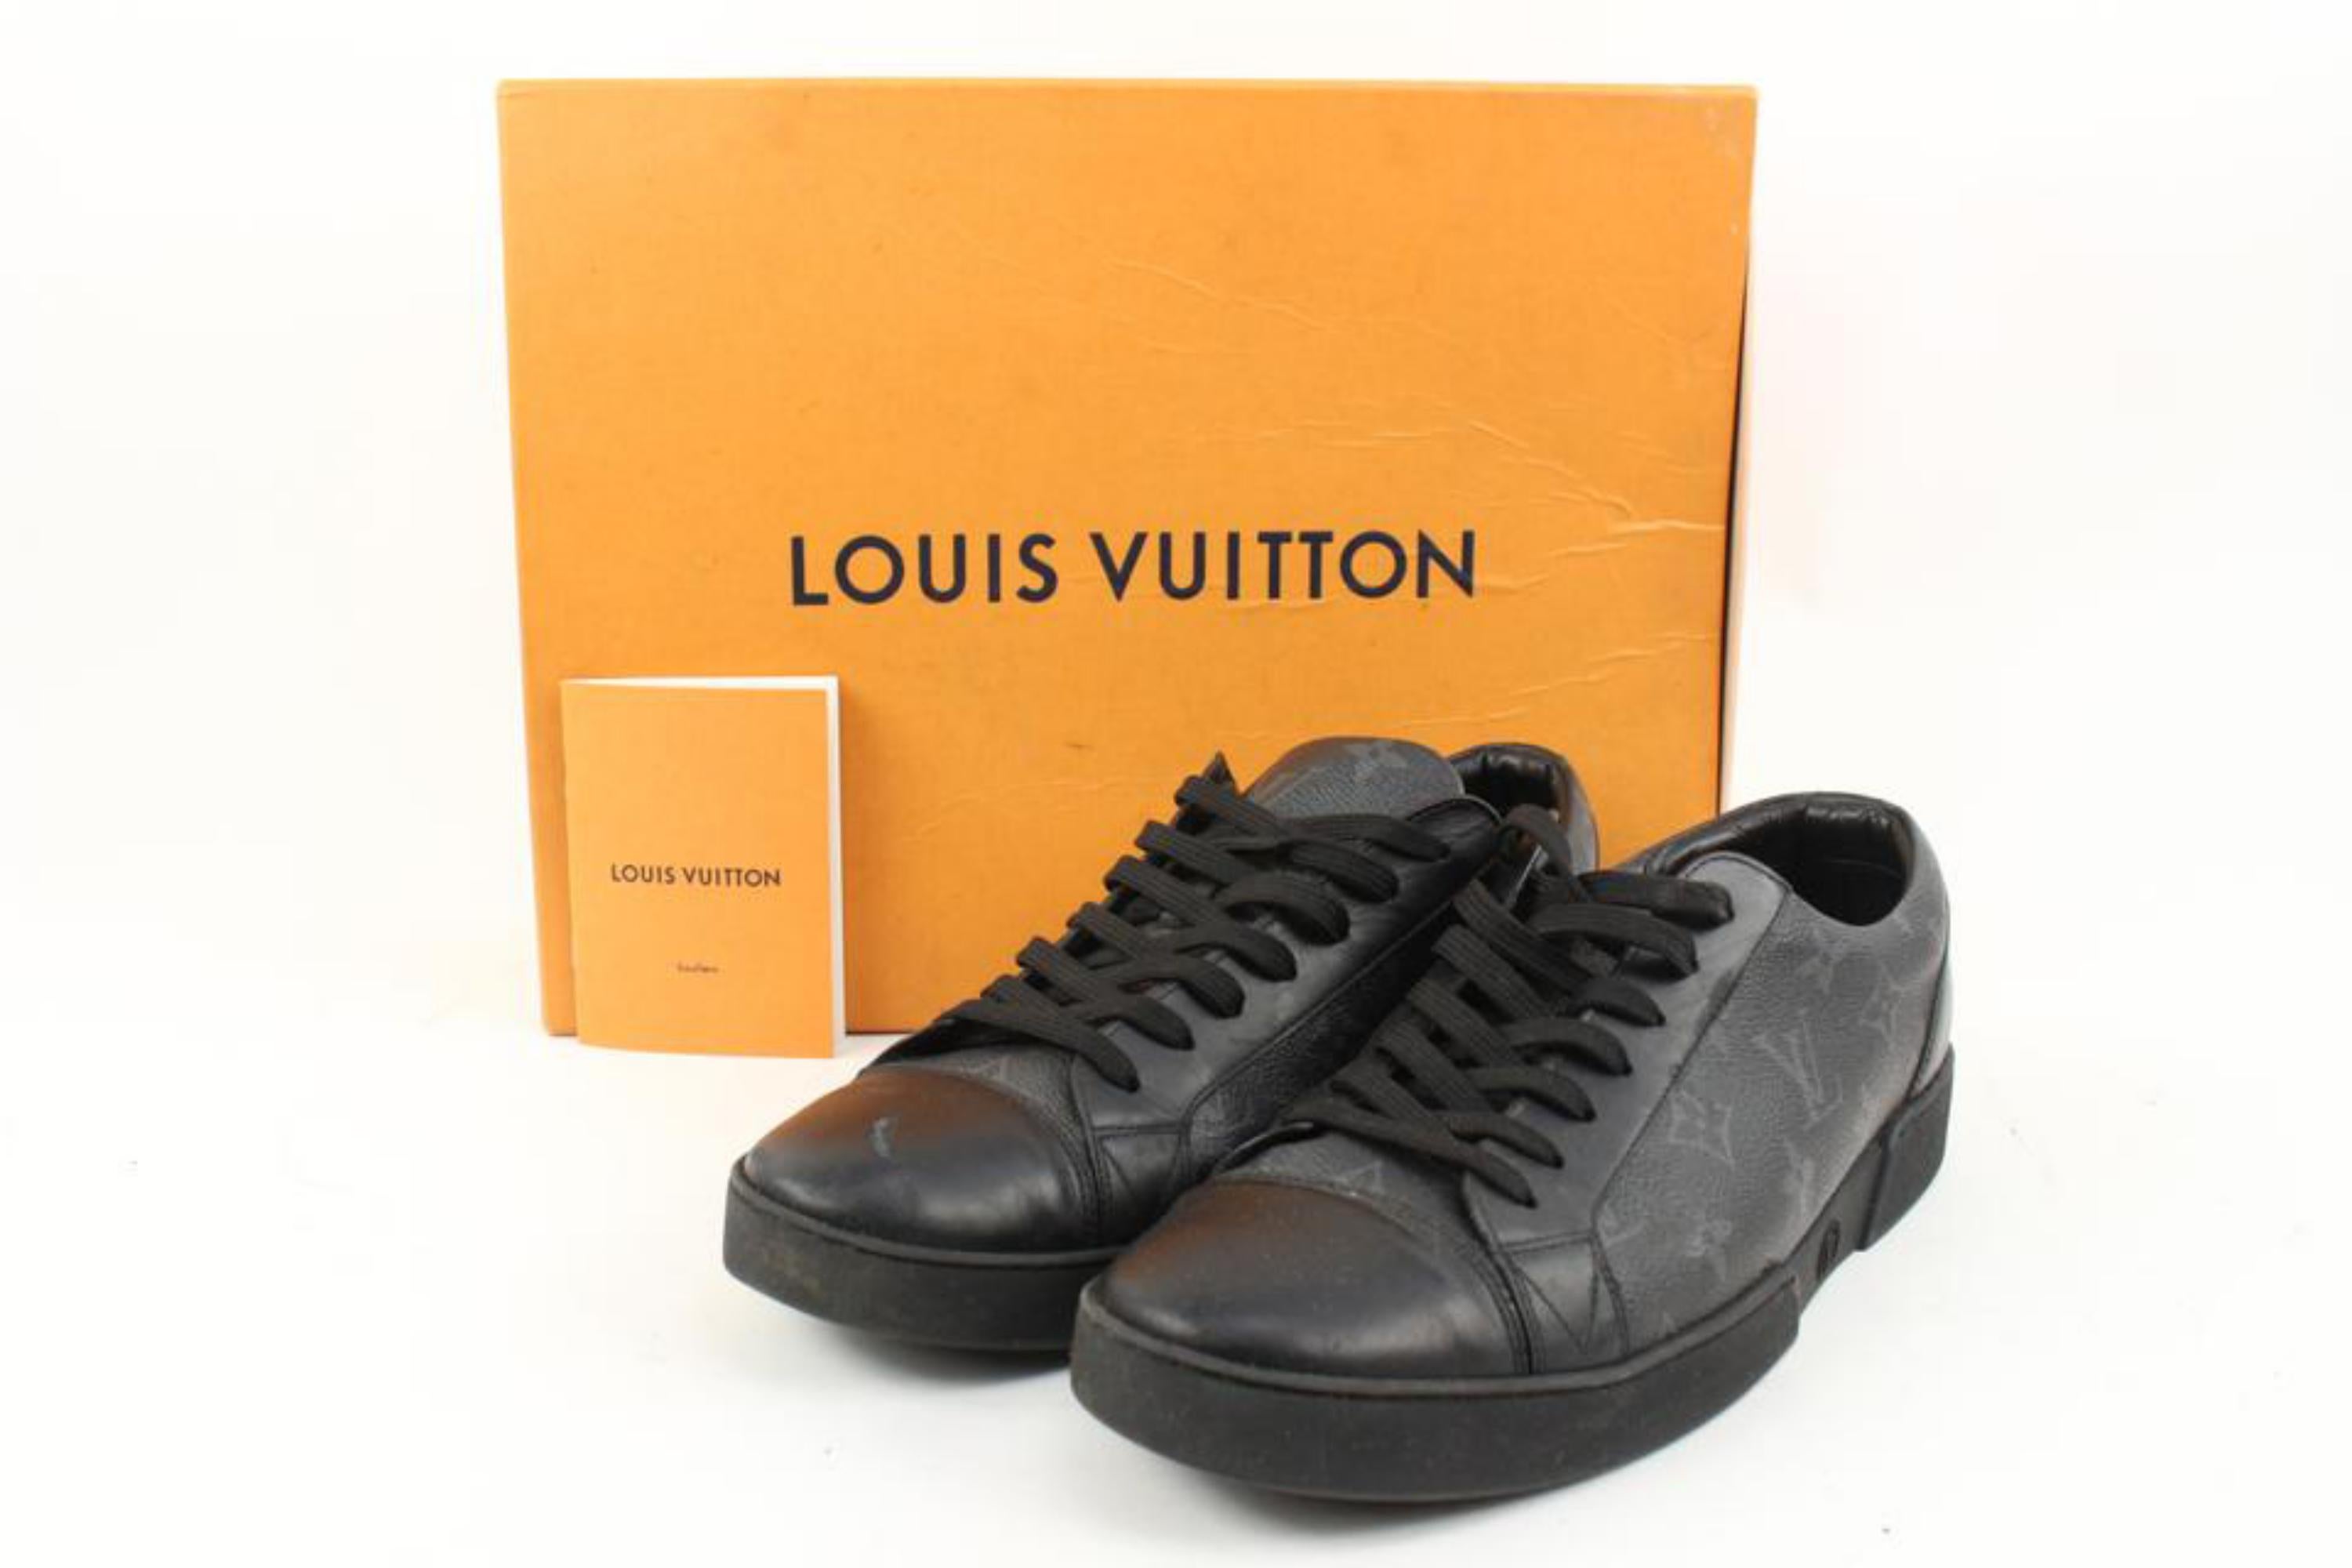 Louis Vuitton Luxembourg Sneaker dubbed as the “SQUISHING SHOES”